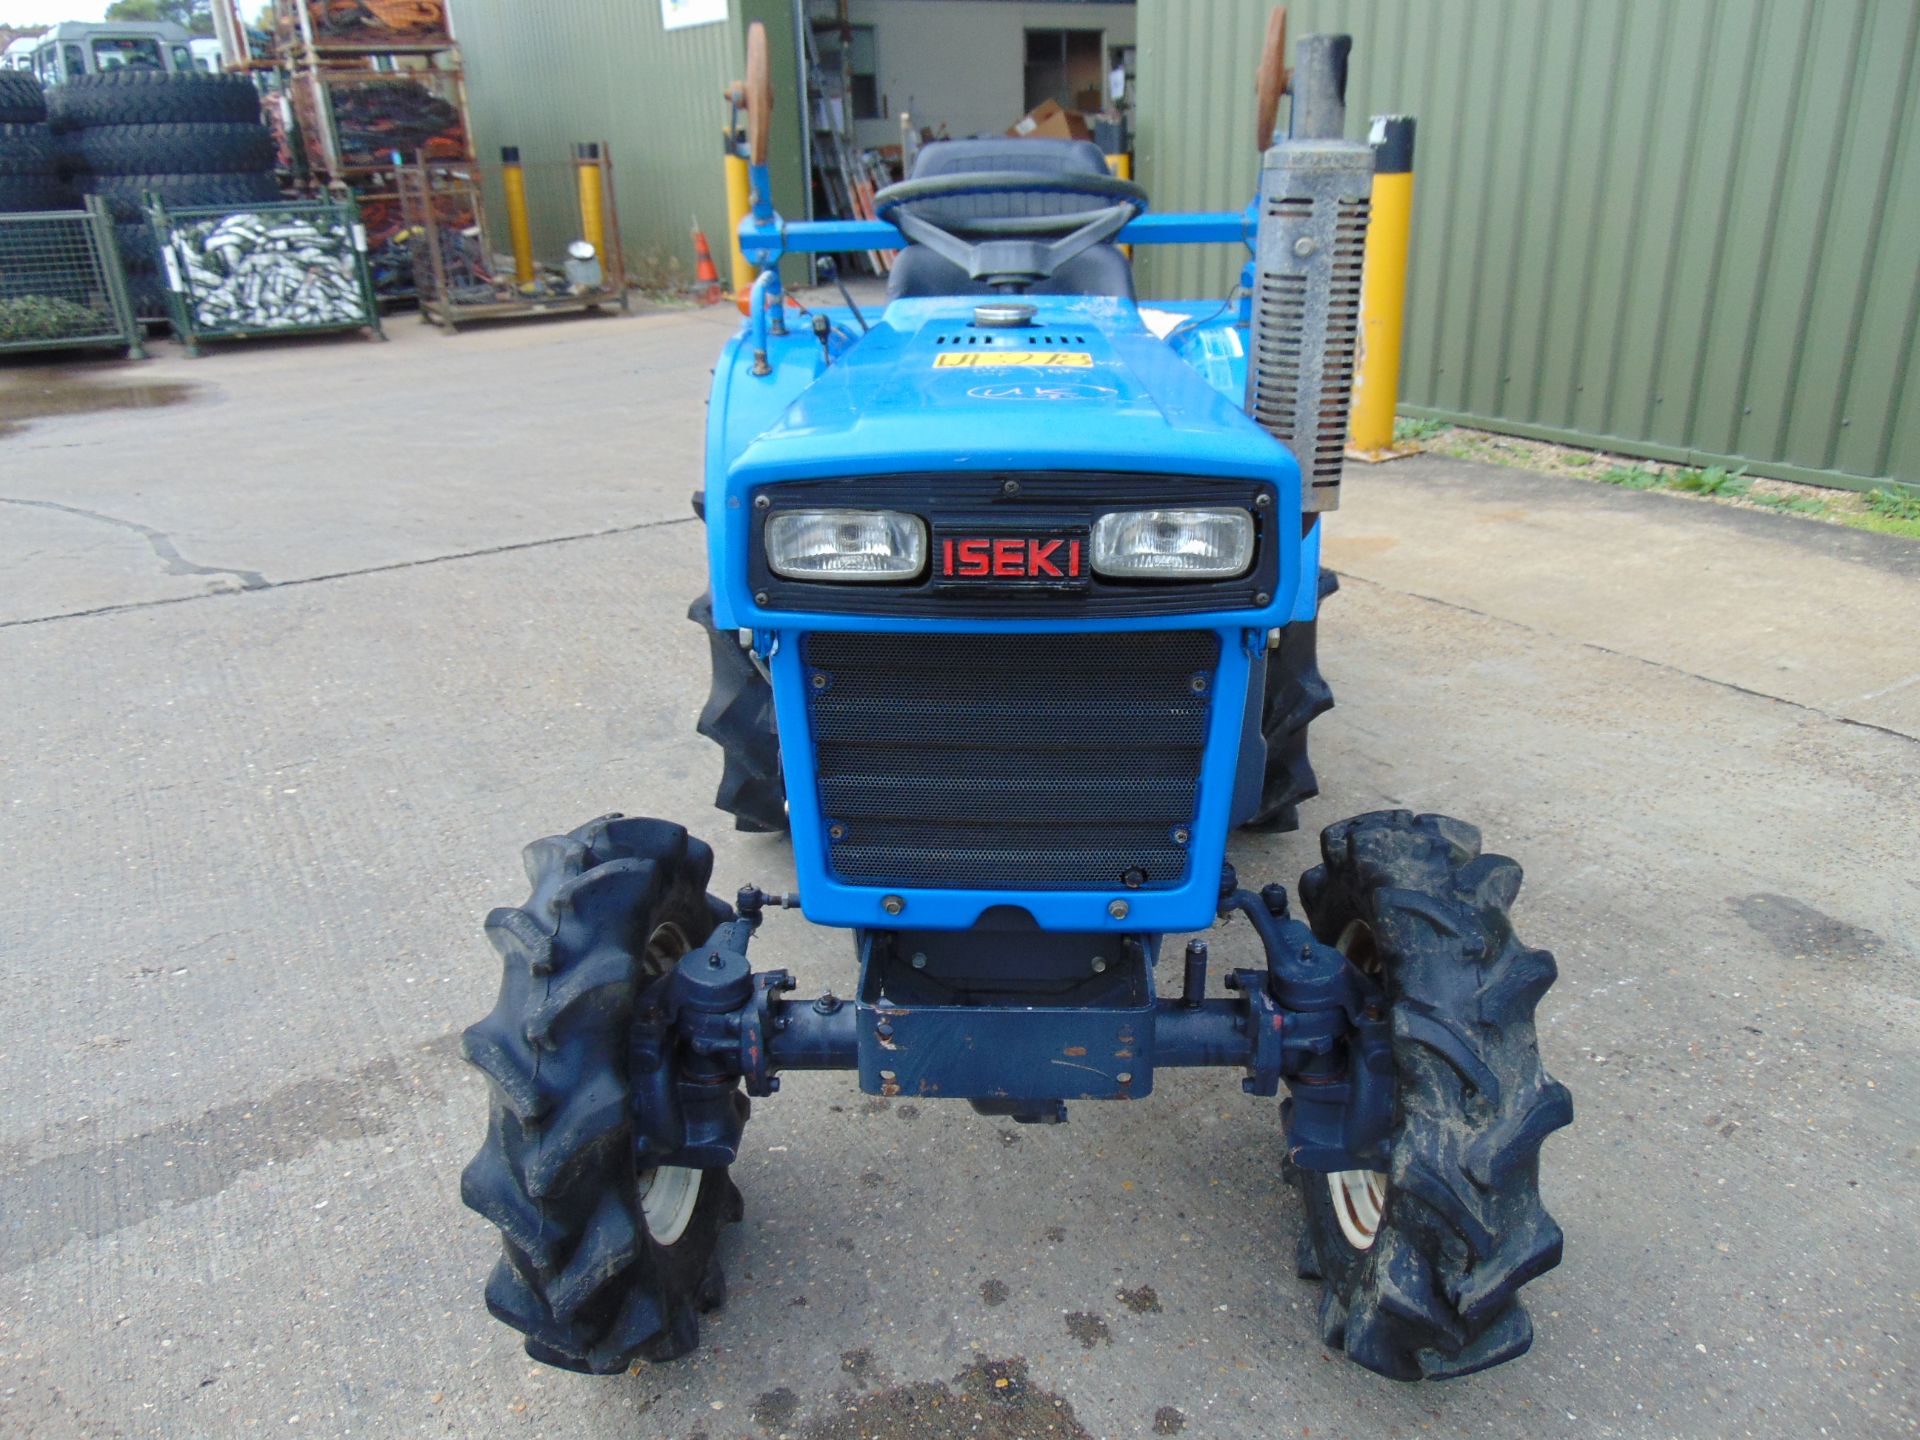 Iseki TX155 4x4 Diesel Compact Tractor c/w Rotovator ONLY 834 HOURS! - Image 3 of 20